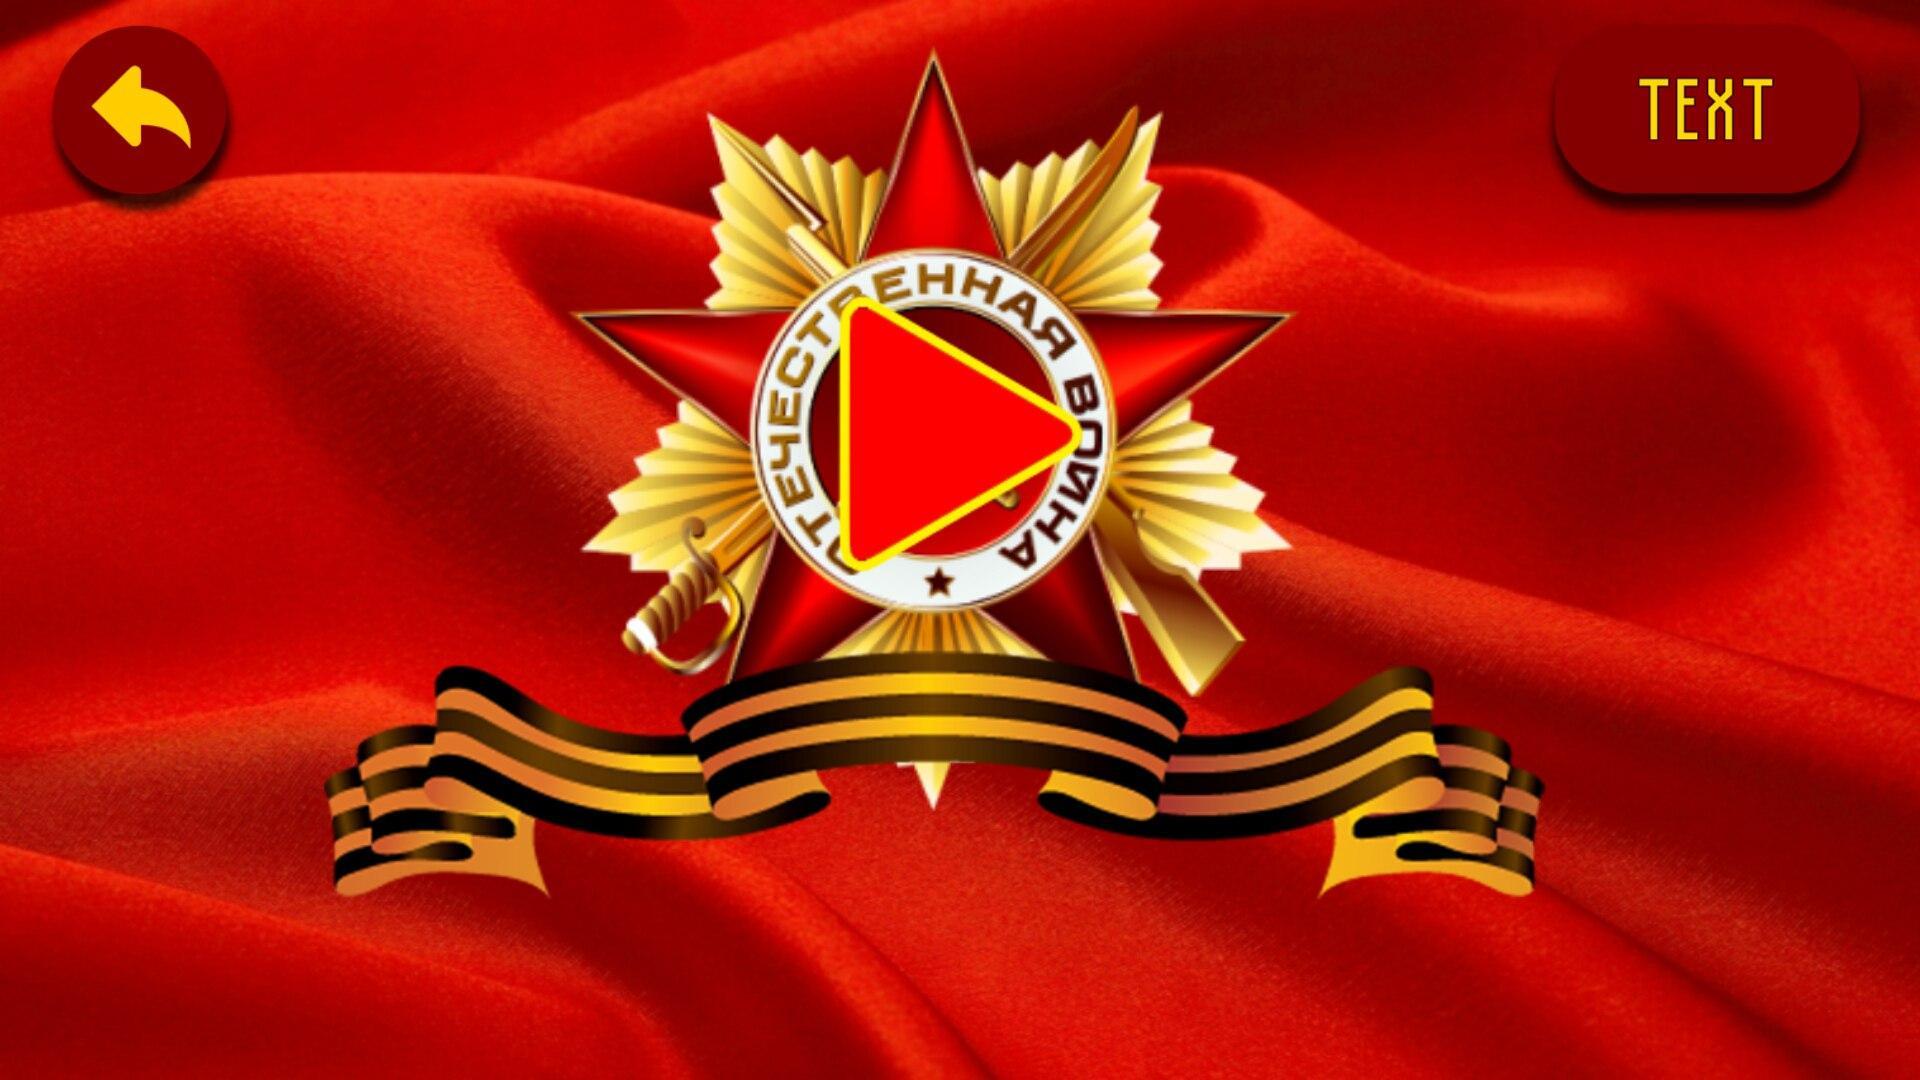 USSR Anthem for Android - APK Download